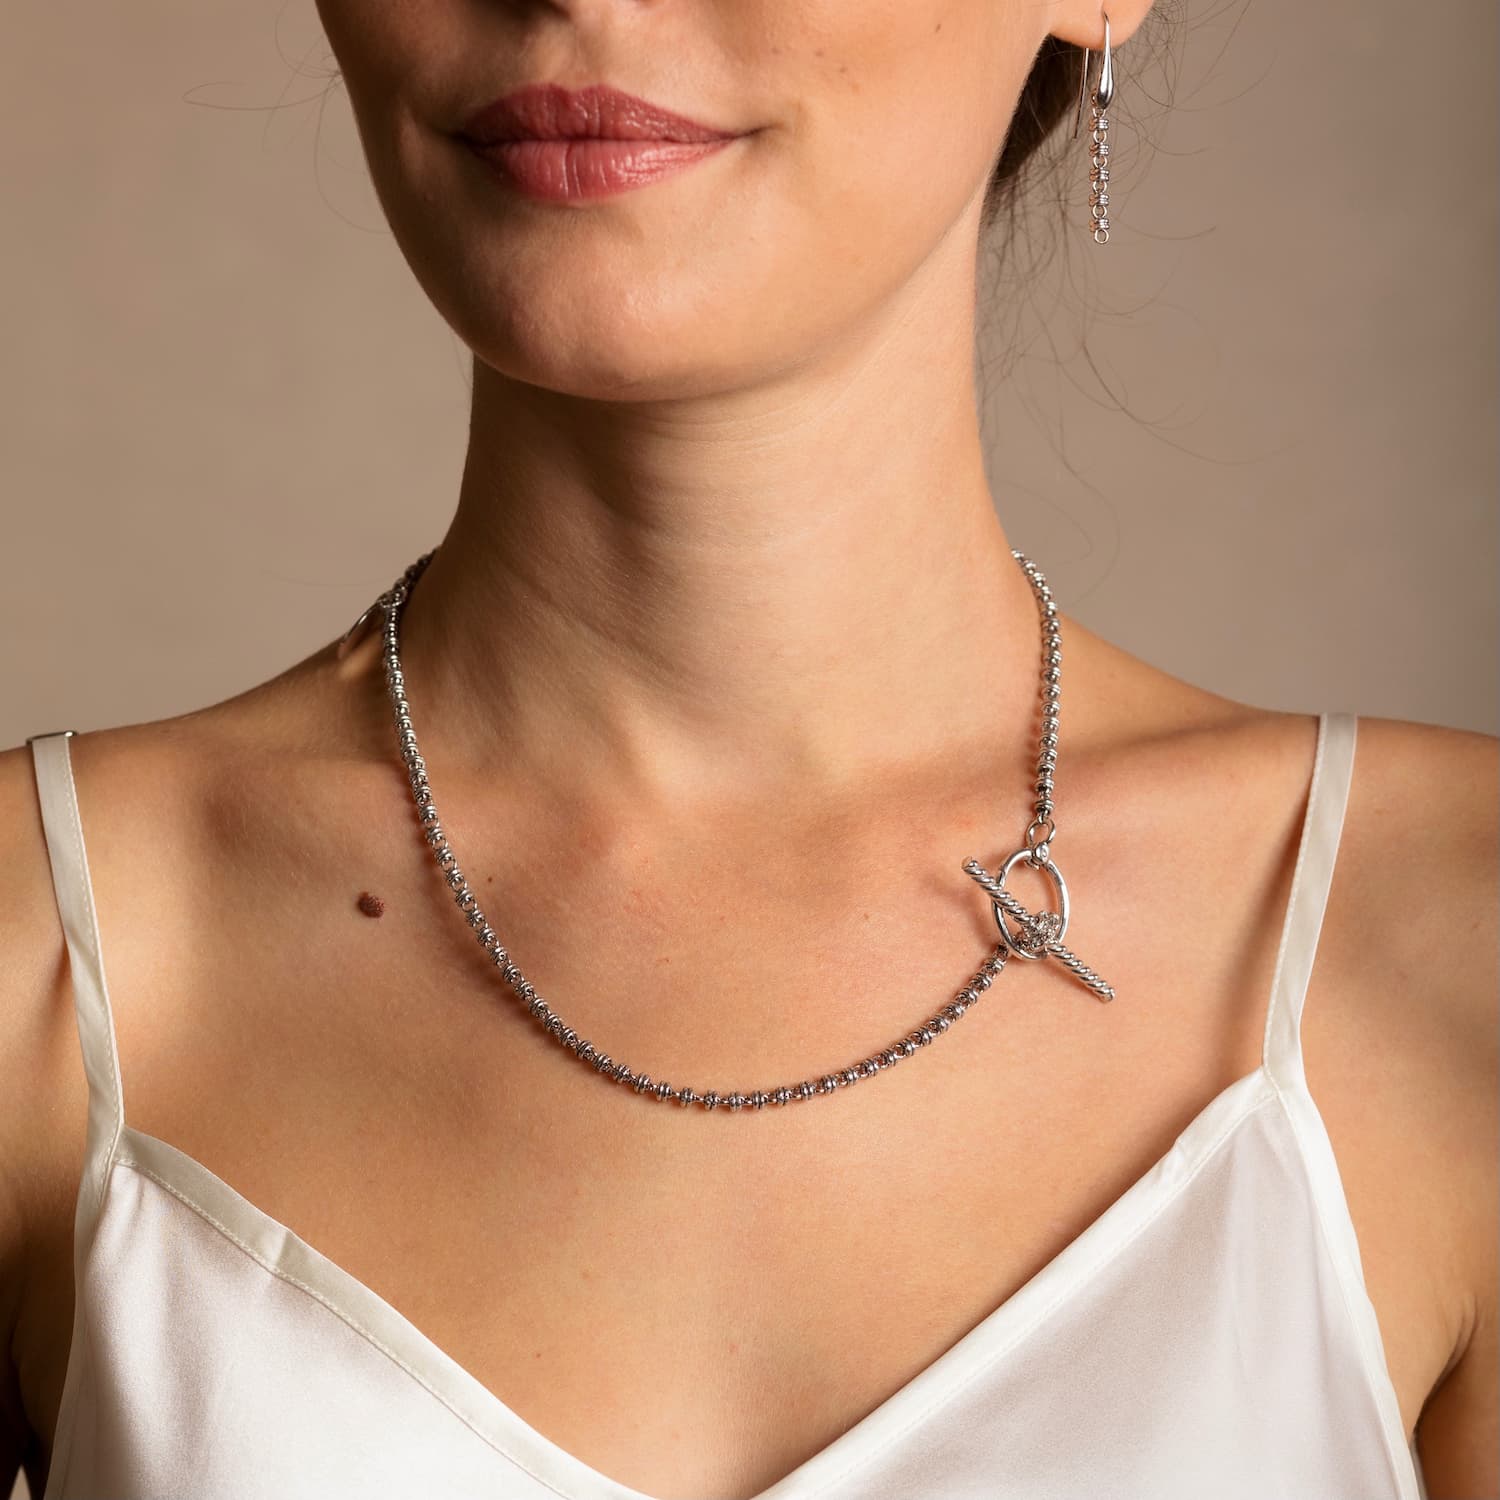 A model wearing a silver necklace with a toggle clasp and silver earrings to match the silver chain in the necklace - both from the Links 3mm collection from DelBrenna Italian Jewelry designers and artisans. Hand-crafted in Tuscany.